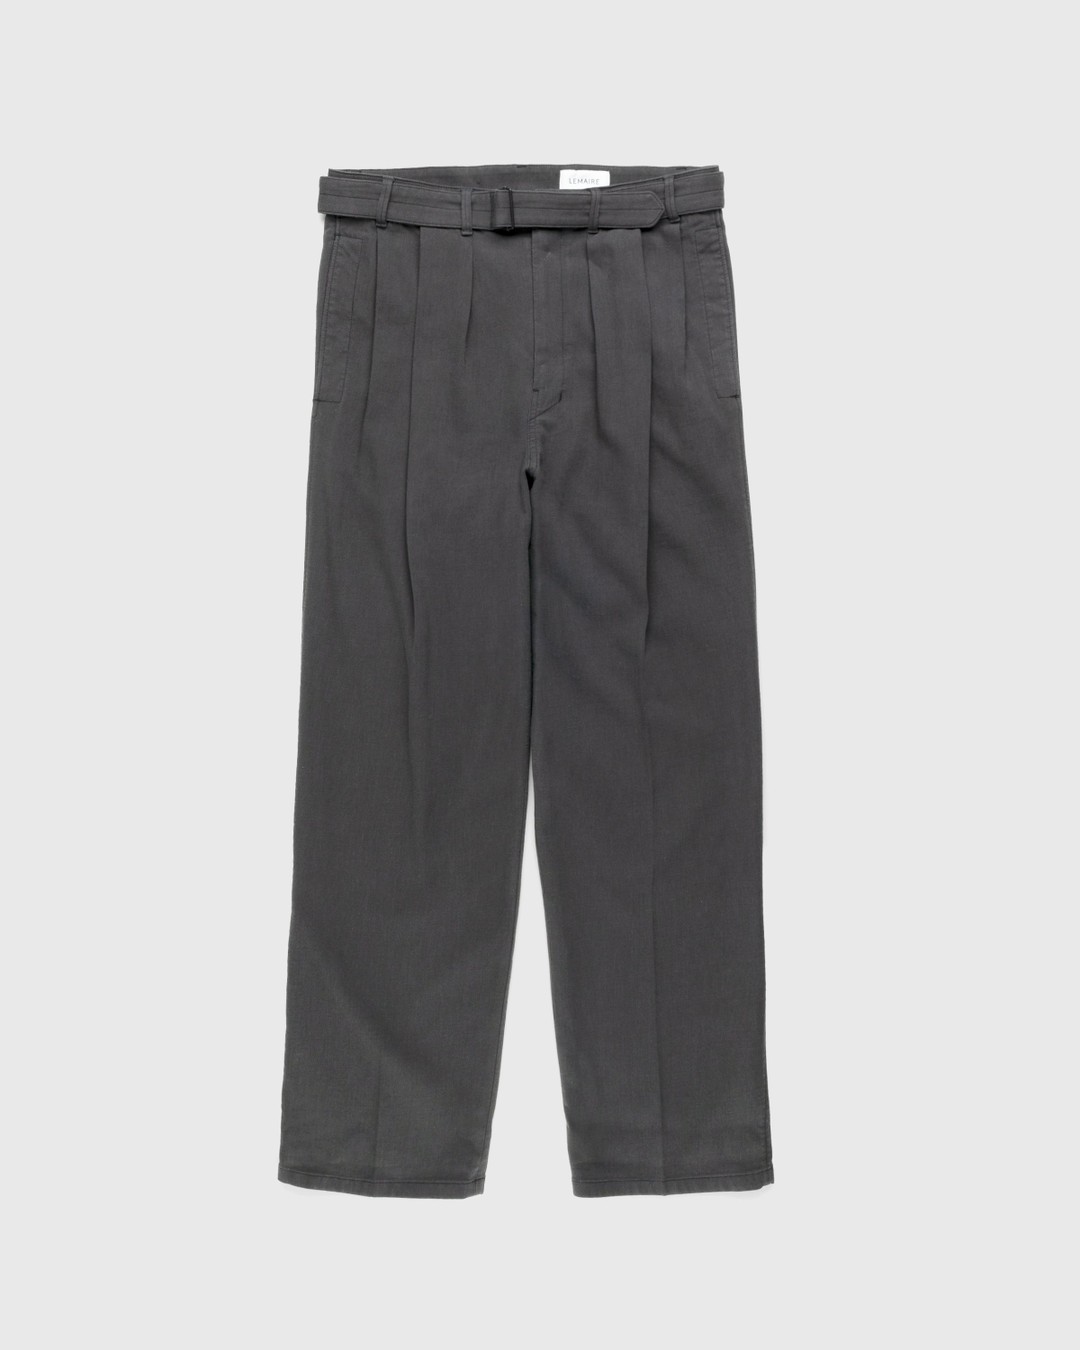 Lemaire – Loose Pleated Pants Grey - Pants - Brown - Image 1